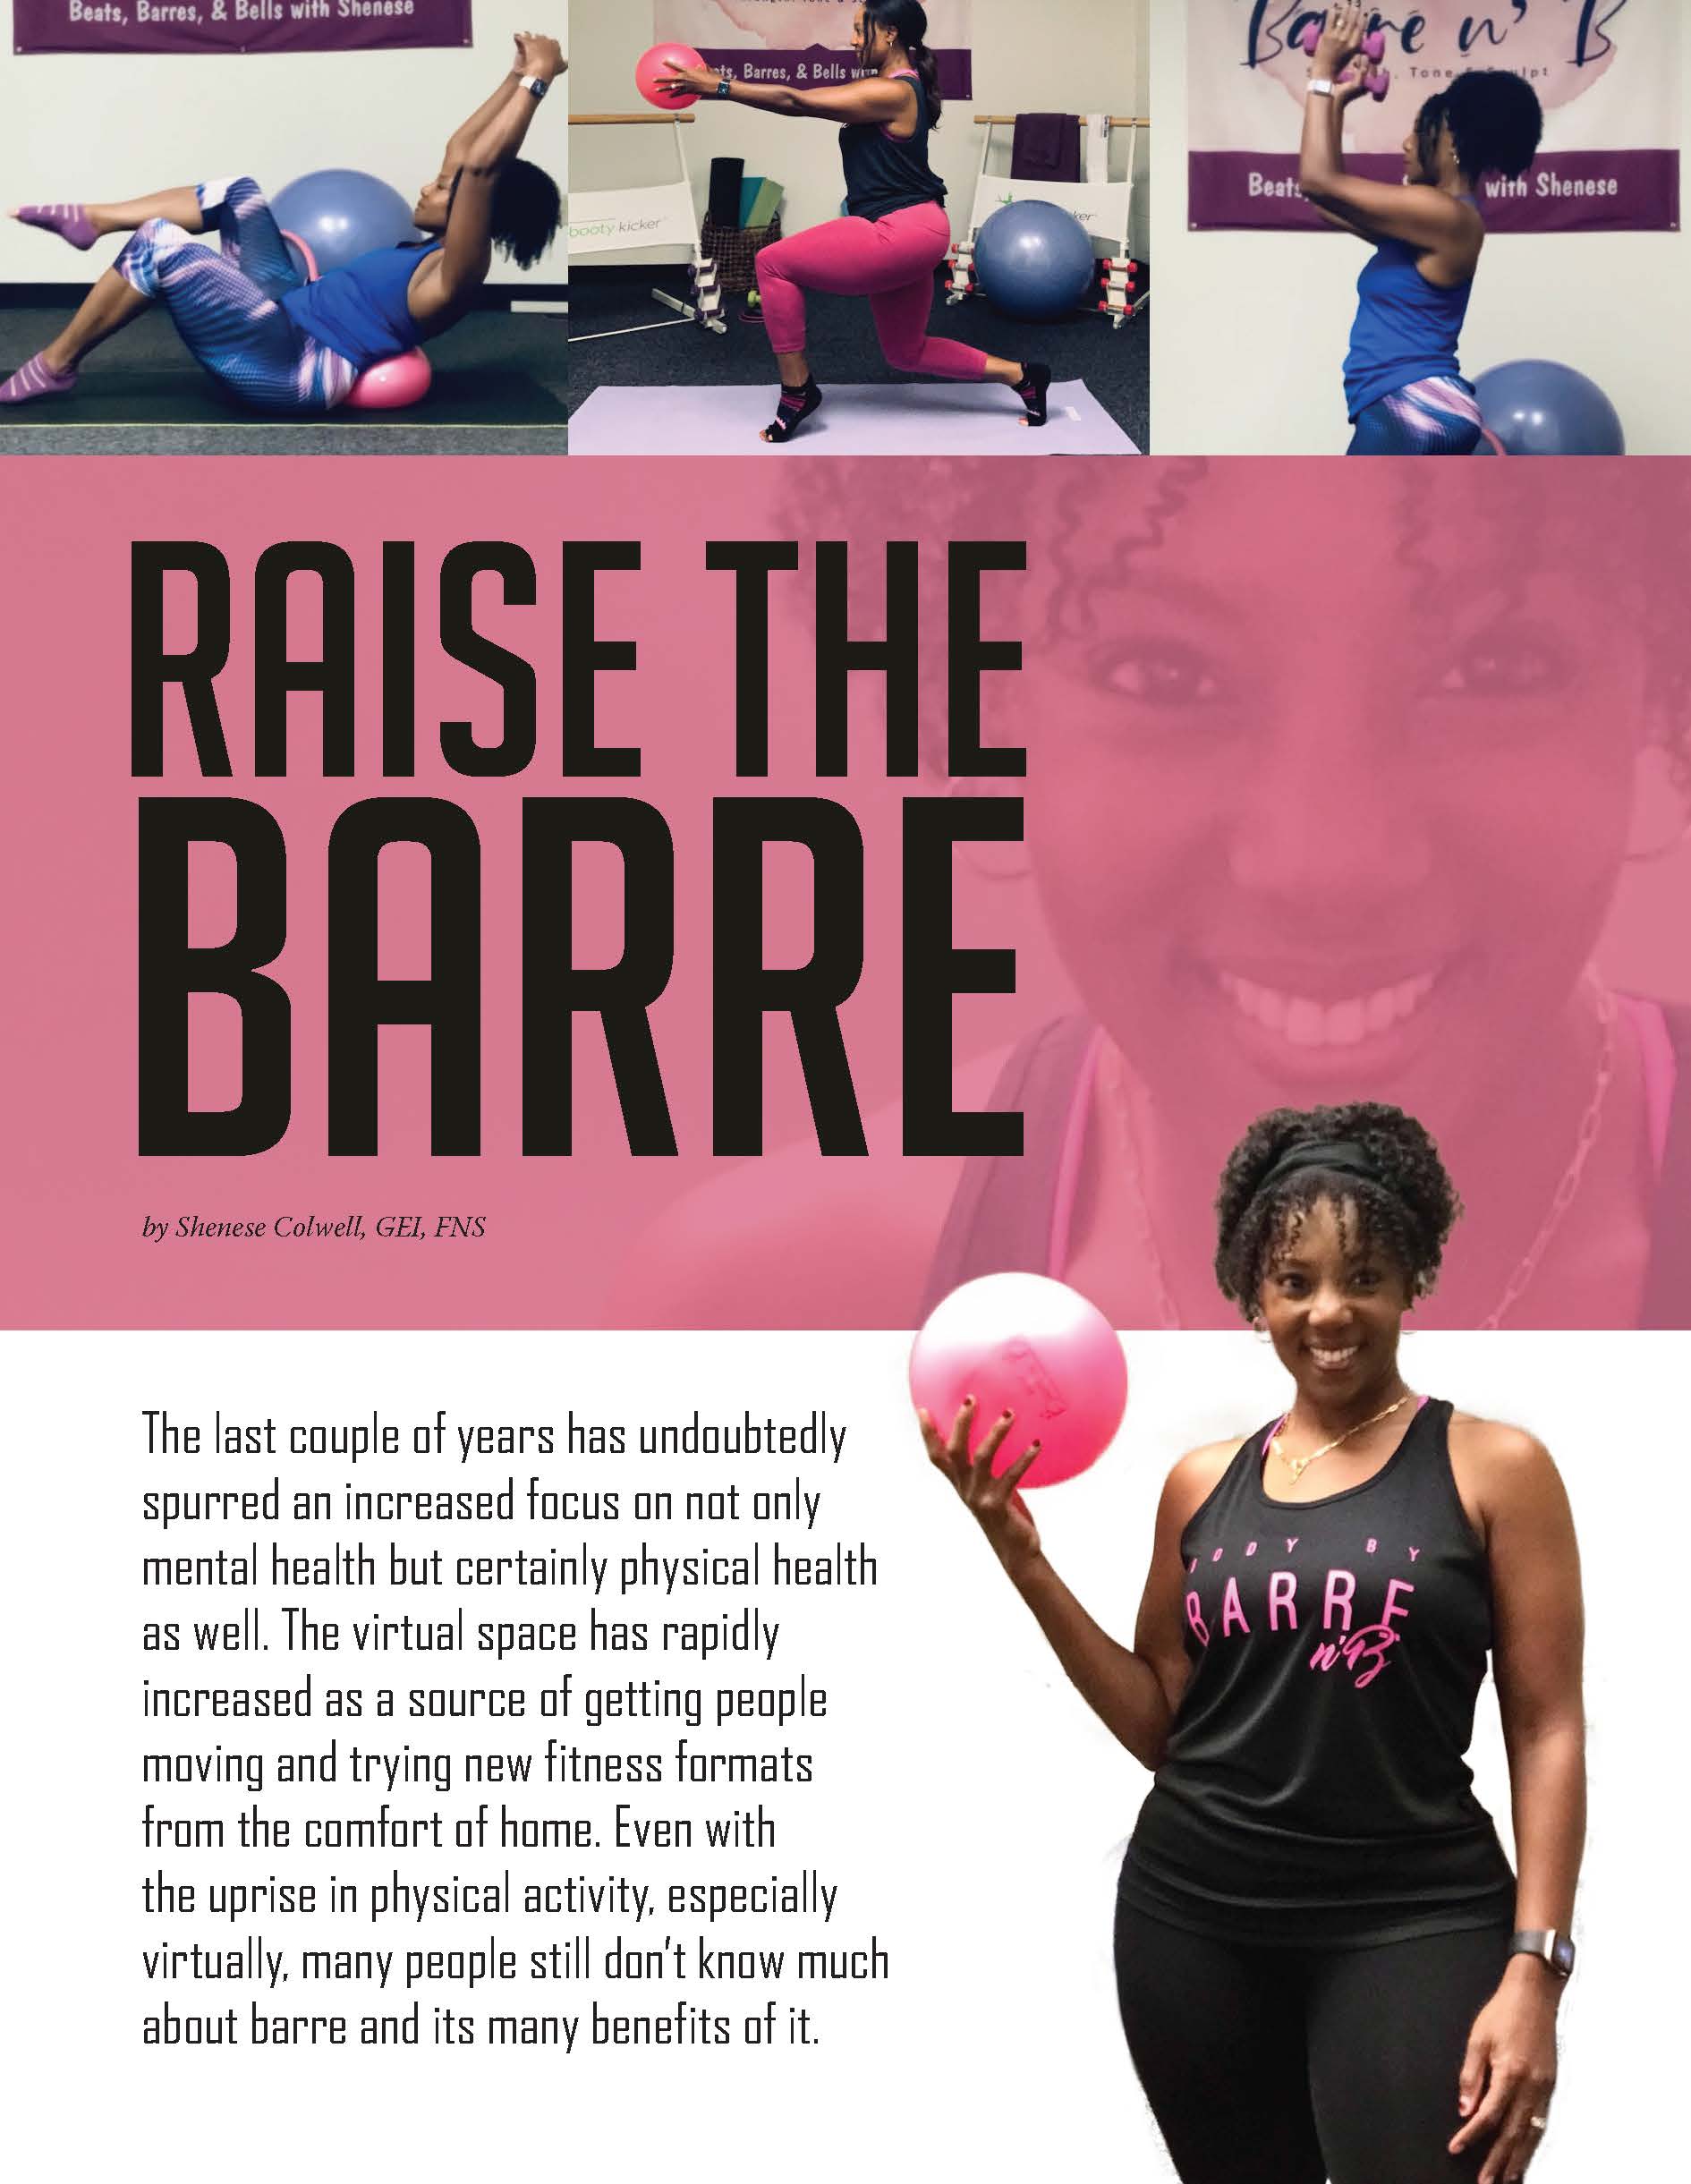 Get a Great Barre Workout At Home